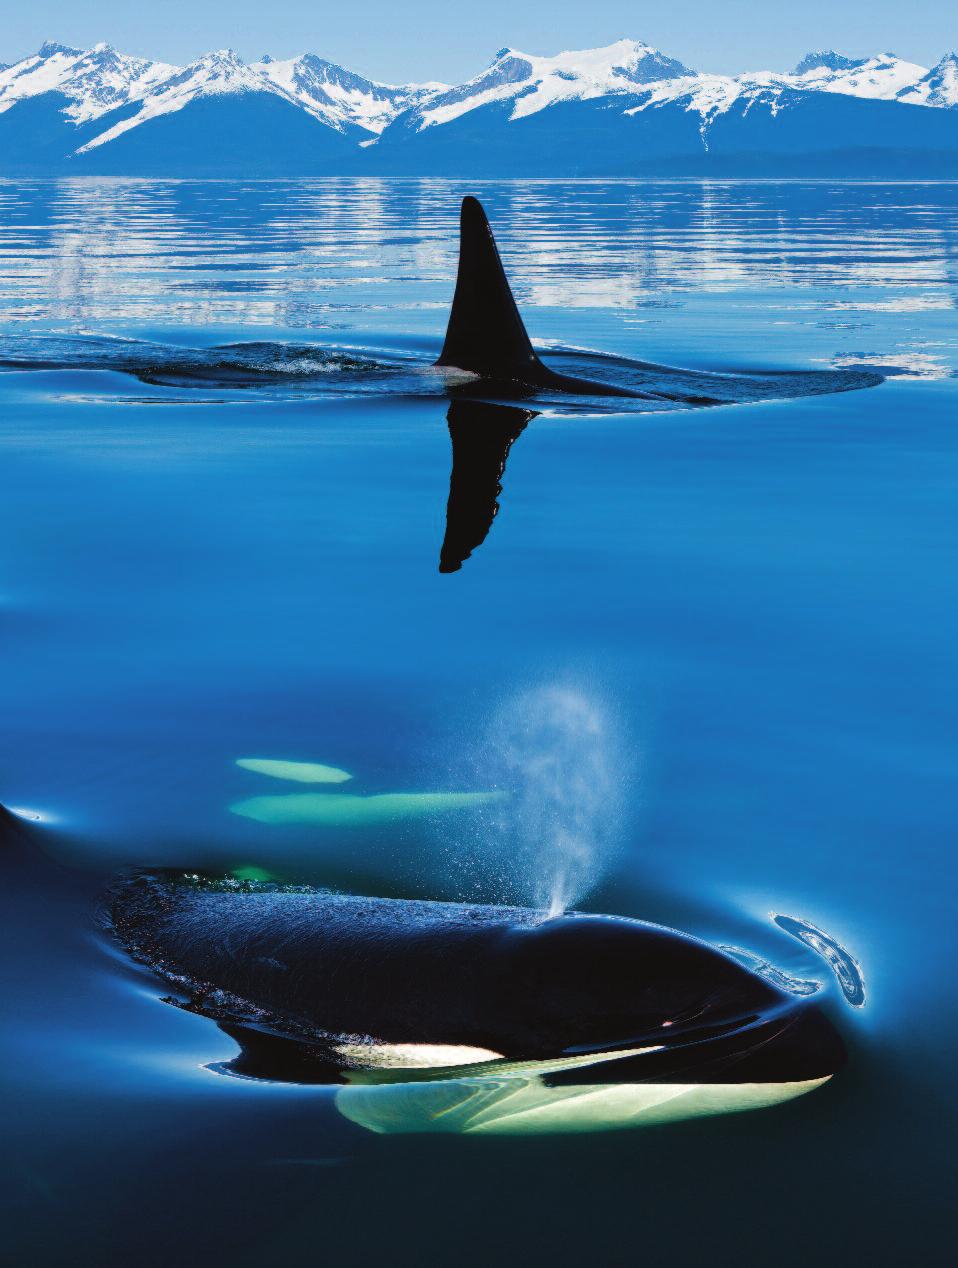 Also known as killer whales, orcas are renowned for their finely-tuned hunting skills, but this is only part of the story, says Rob Lott, policy manager for the Whale and Dolphin